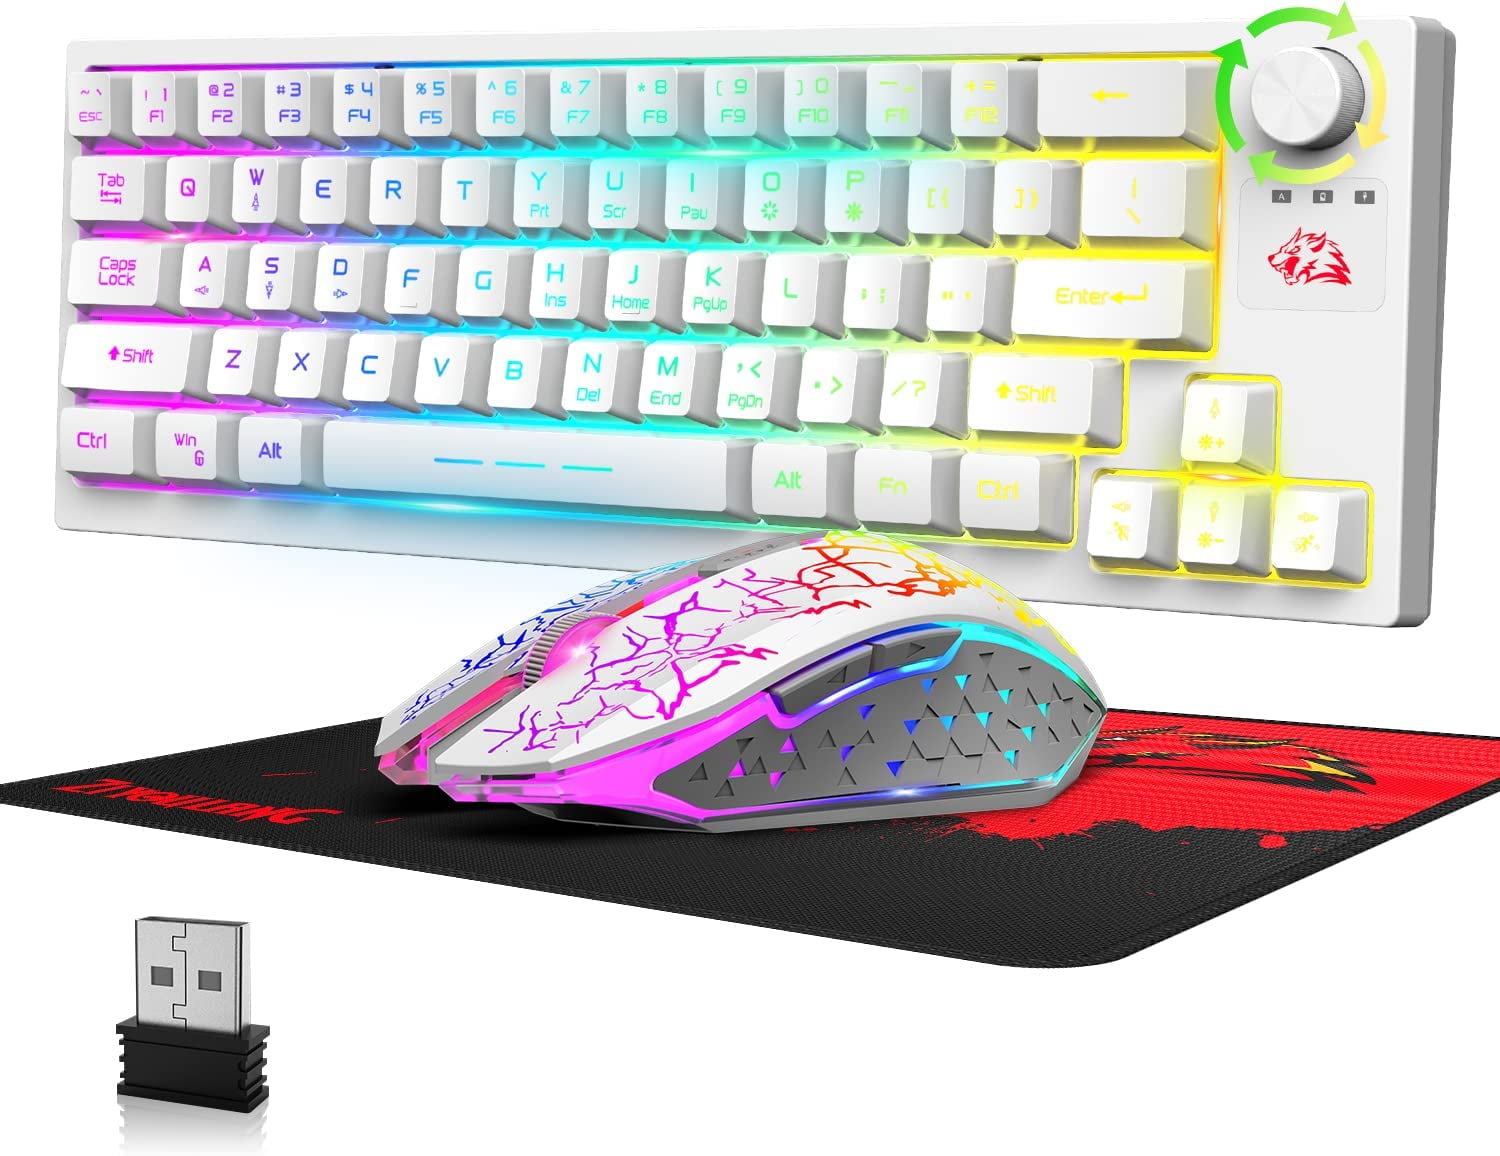 Wireless Gaming Keyboard and Mouse Combo,12 RGB Backlit 4000mAh Battery,Mechanical Anti-ghosting Keyboard Wireless Gaming Mouse for PC,PS4,Laptops(White) - Walmart.com